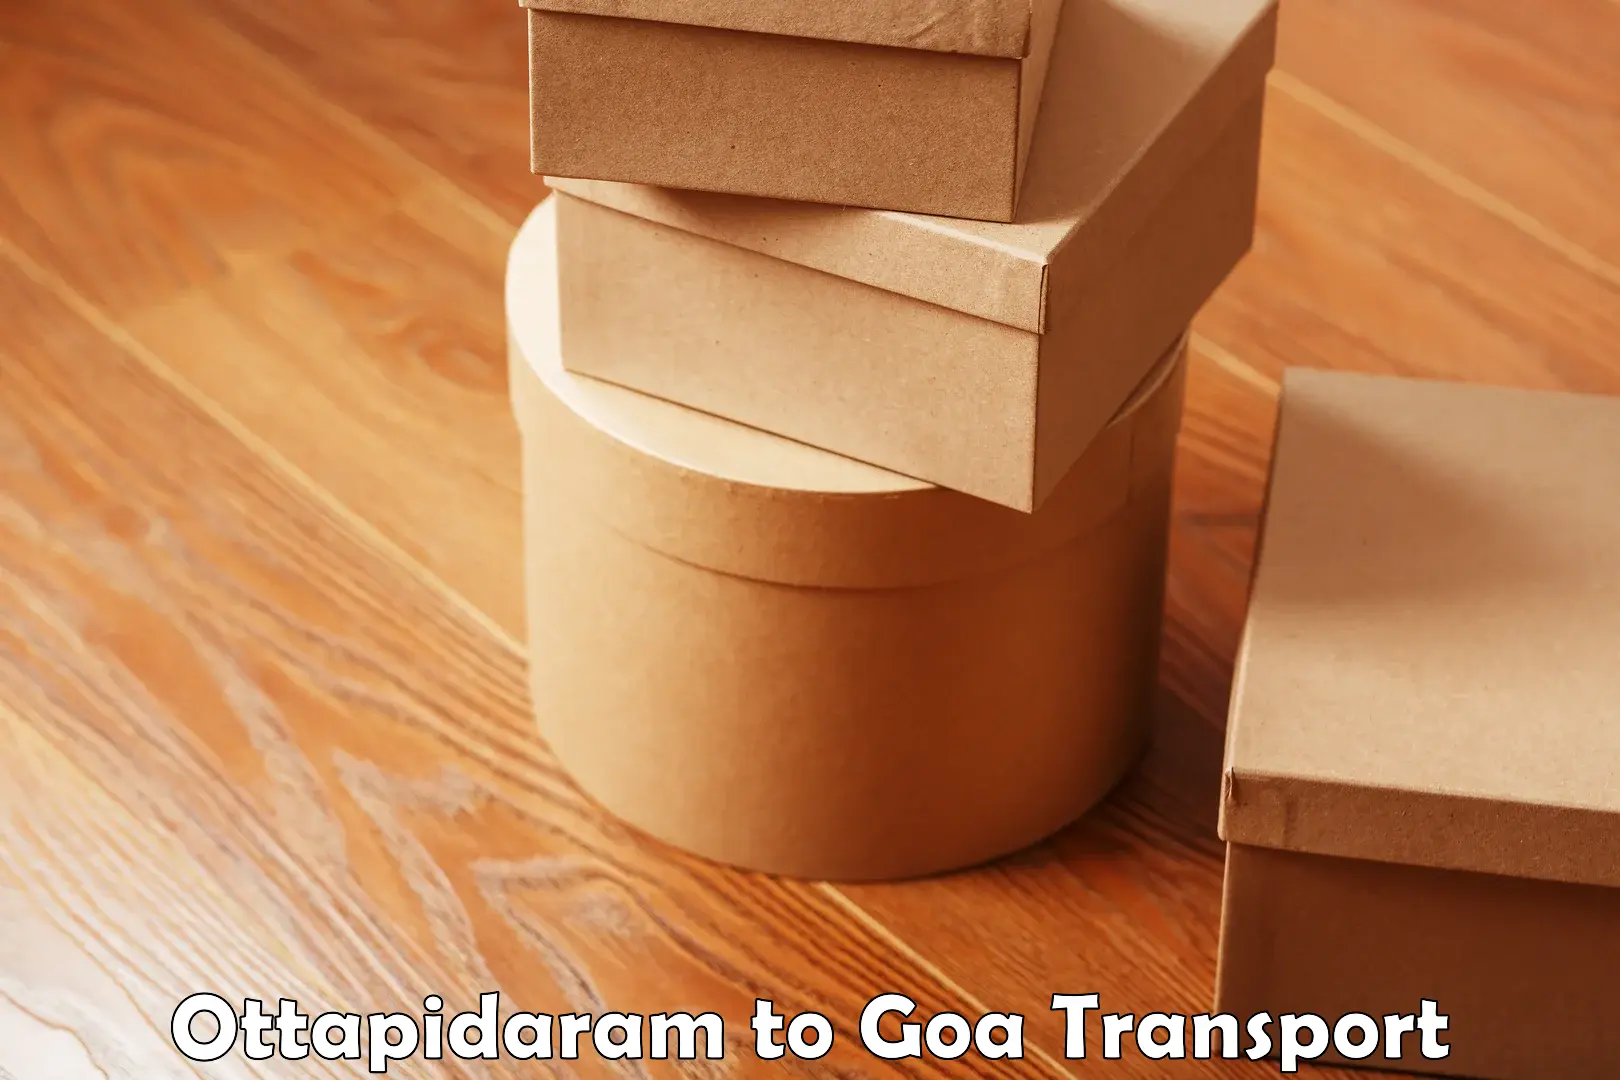 Vehicle courier services Ottapidaram to Panaji